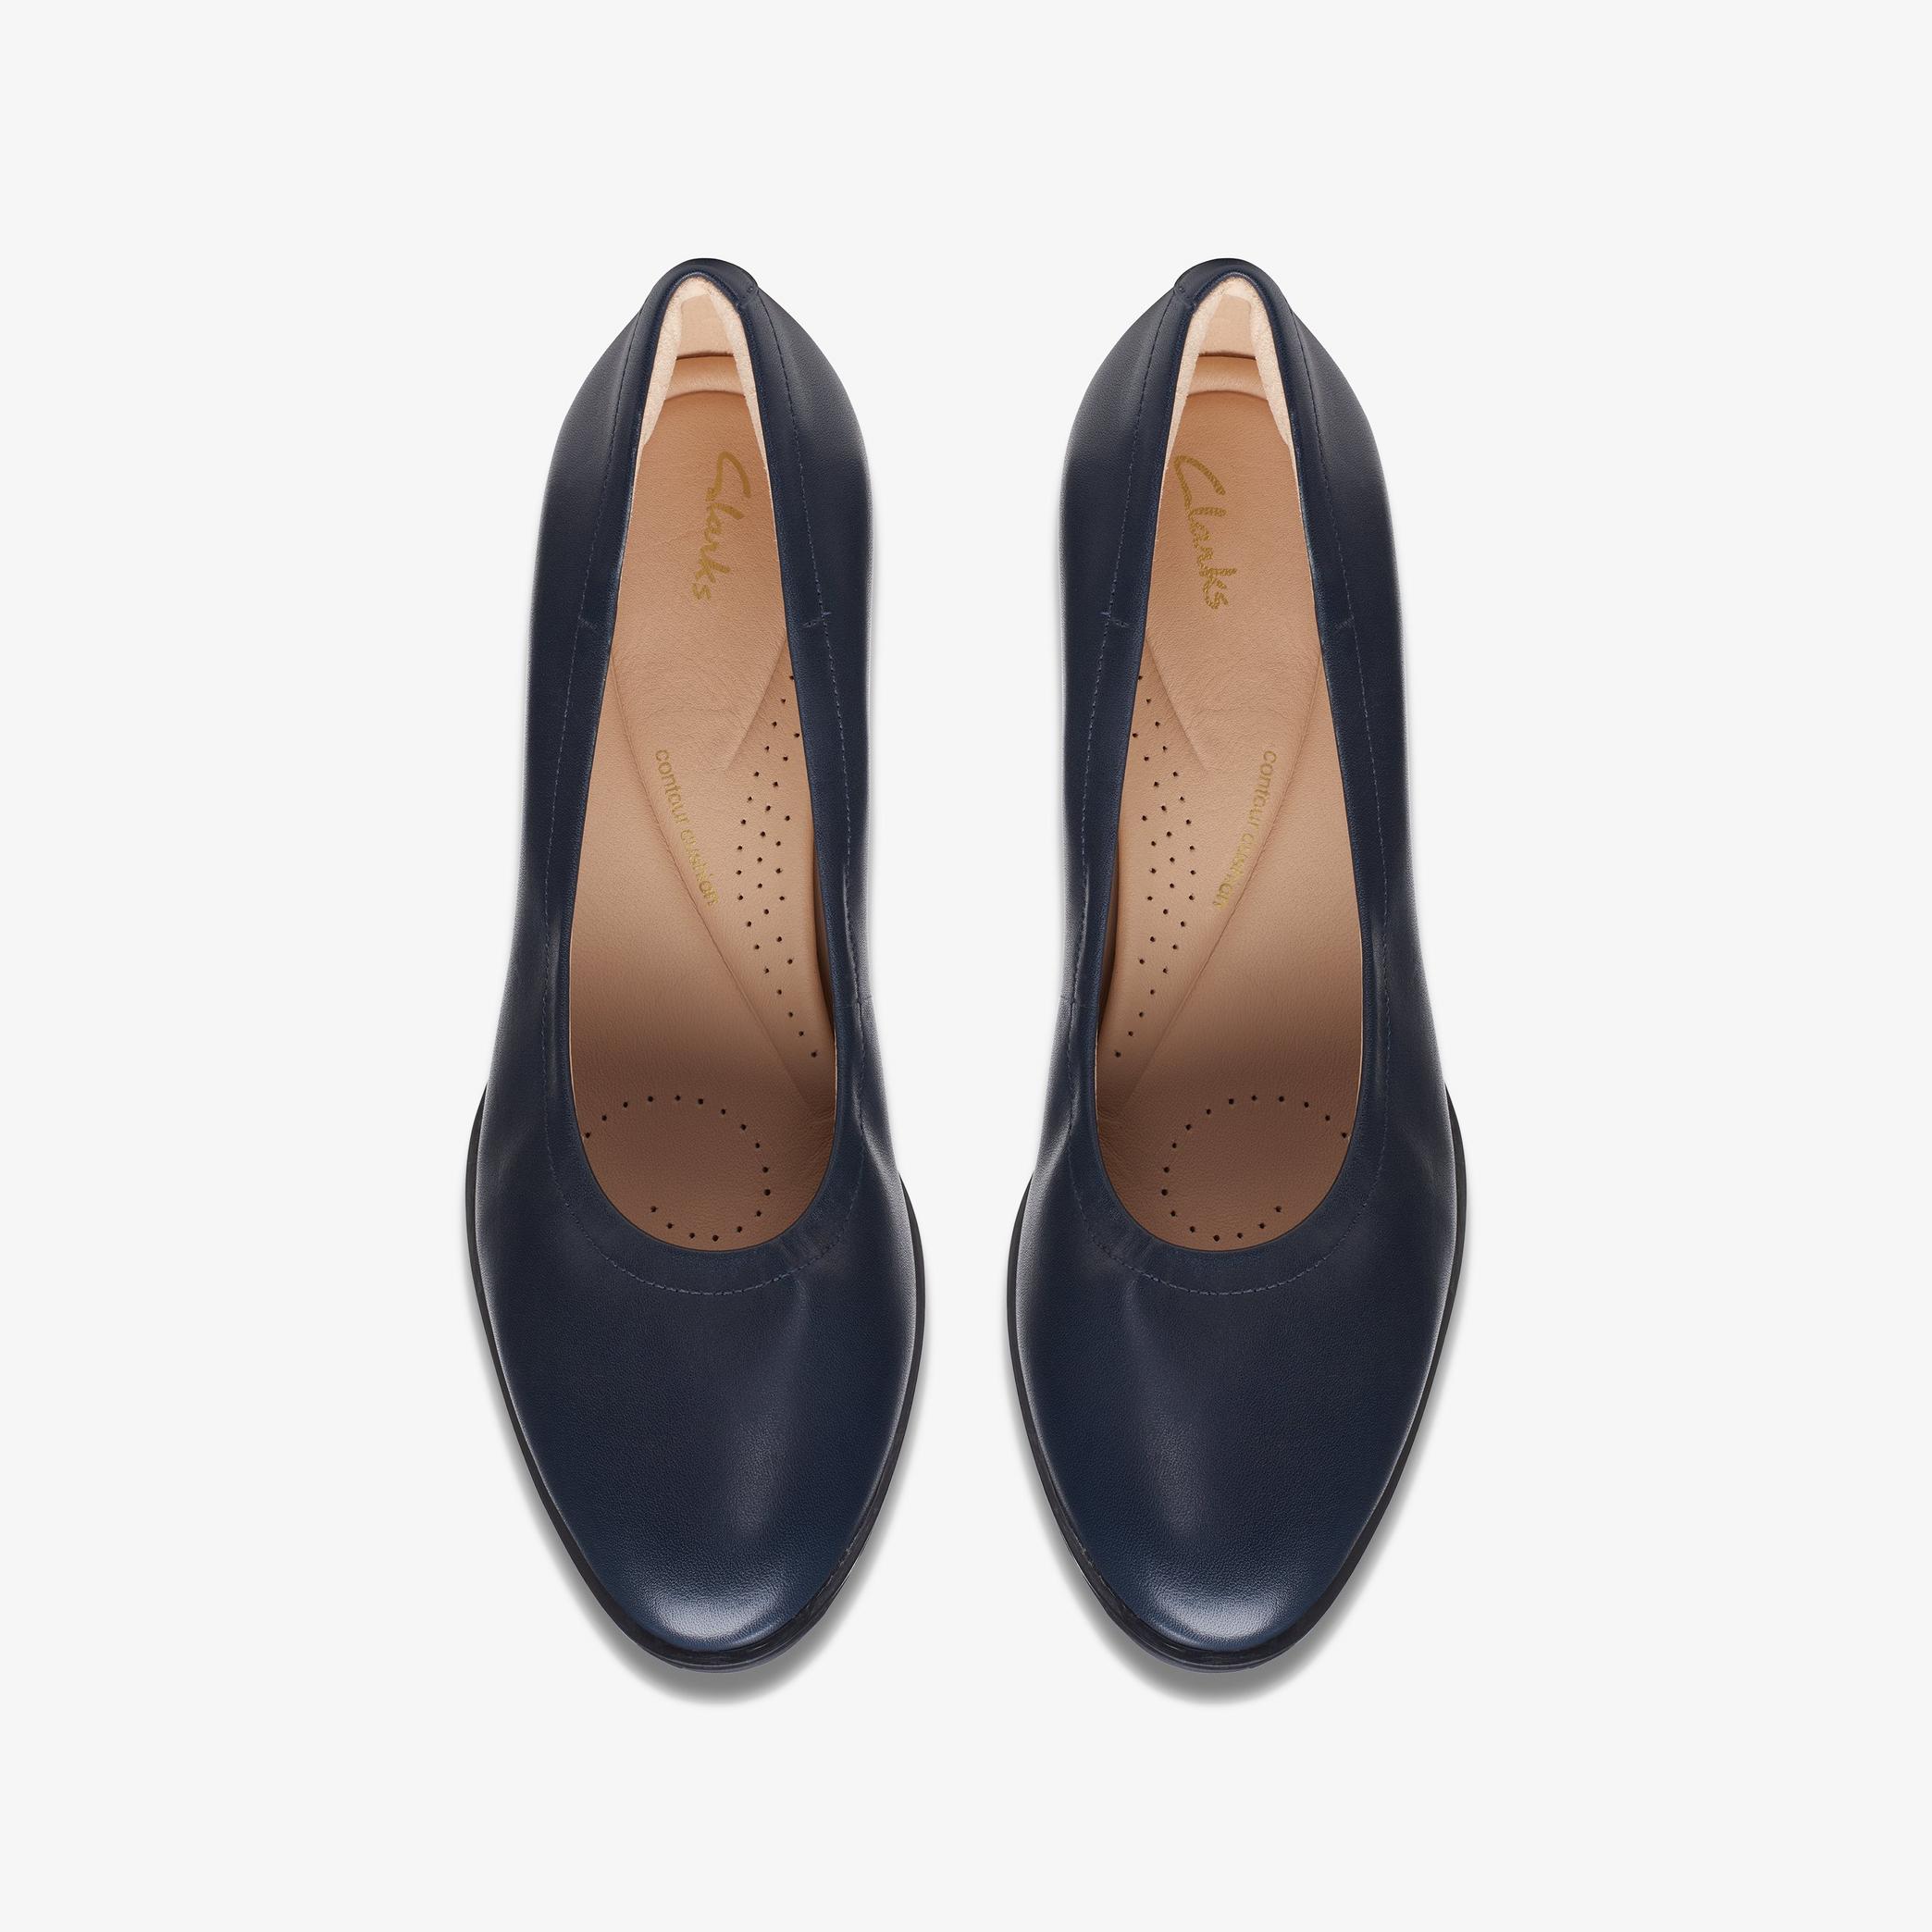 Freva 55 Court Navy Leather High Heels, view 7 of 8